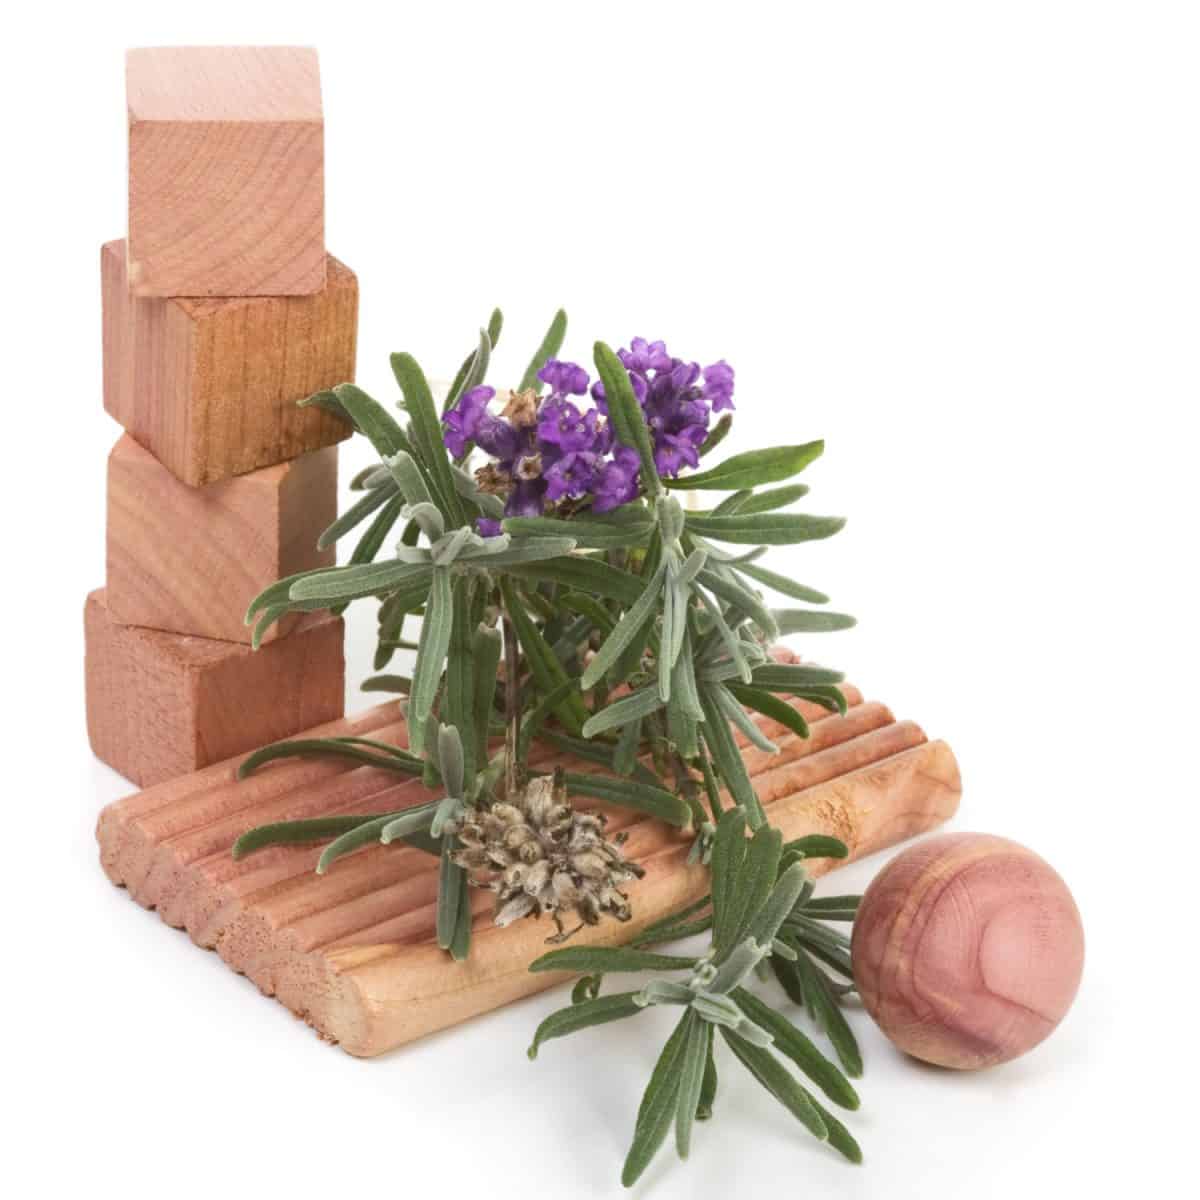 Scented cedar blocks and rosemary on top of a wooden block on a white background